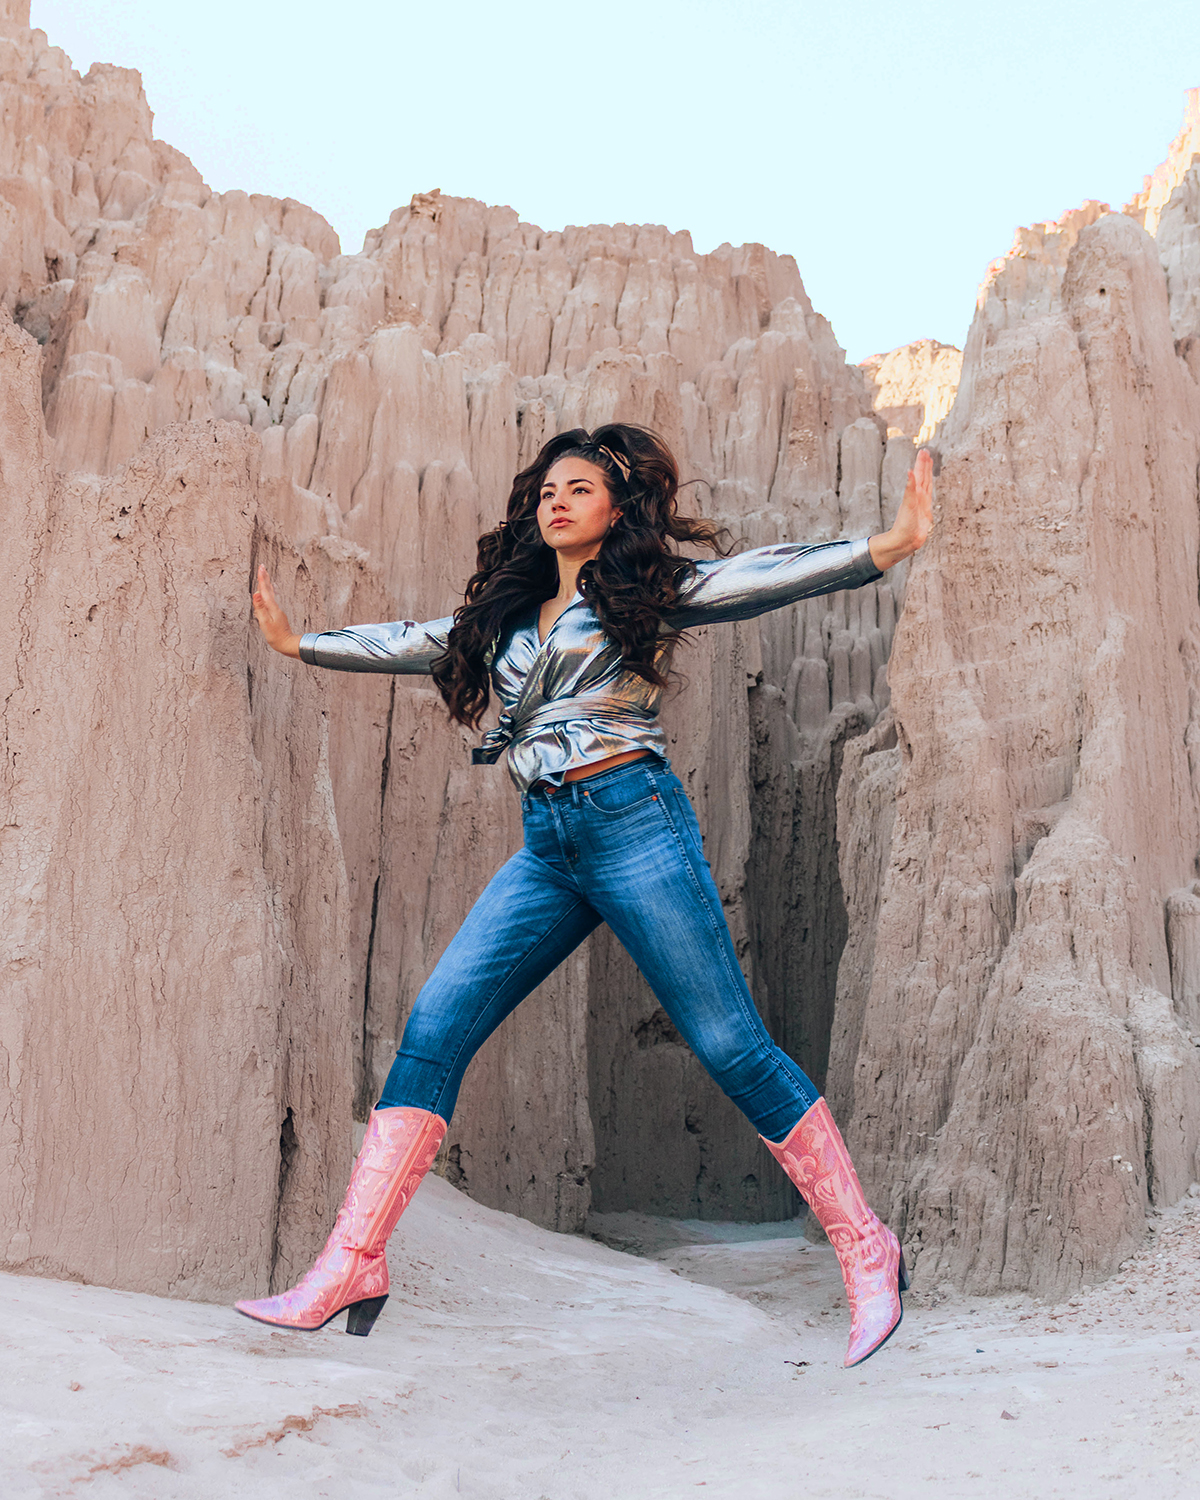 Lauryncakes jumps in to the air in front of Cathedral Gorge in Nevada while wearing sparkly boots, jeans, and a metallic blouse